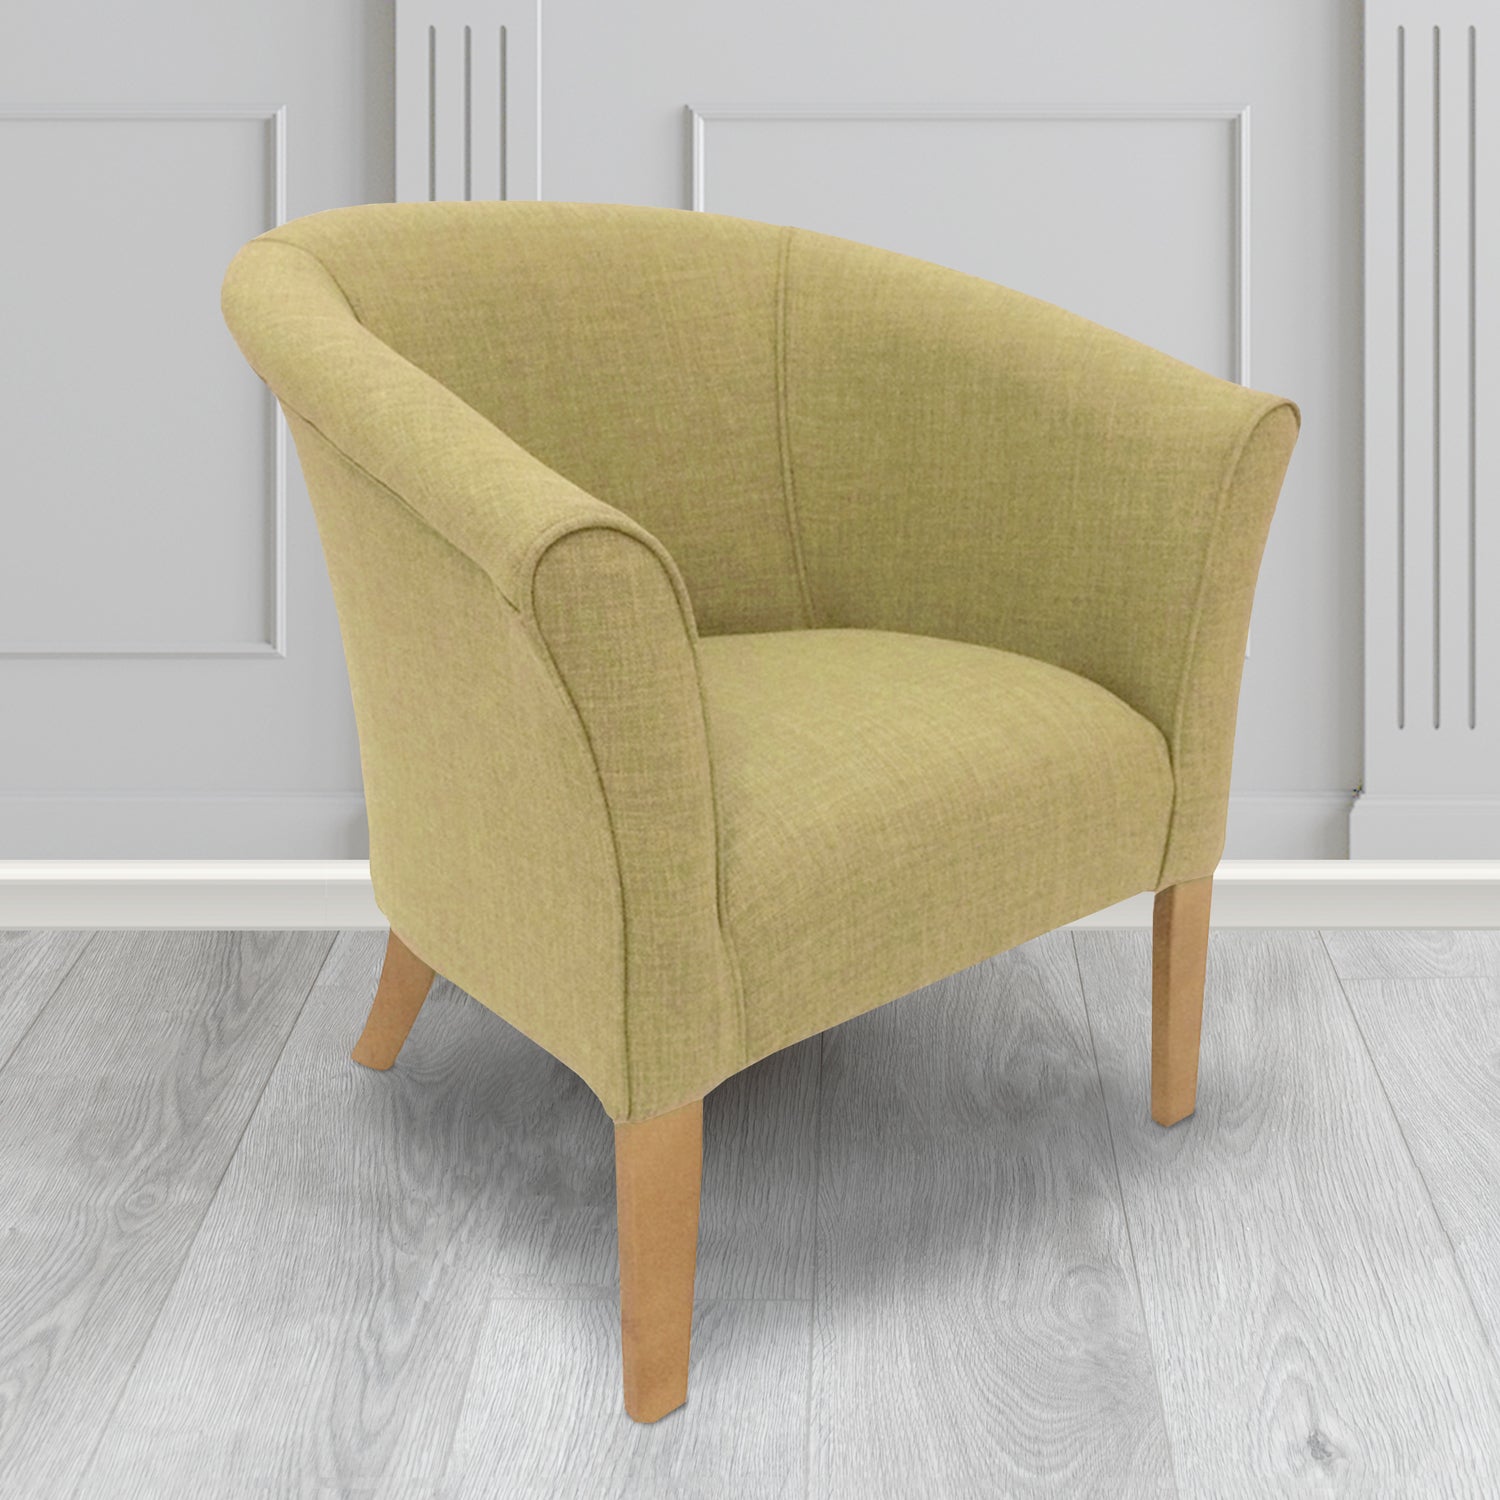 Quill Tub Chair in Linetta Olive Crib 5 Plain Fabric - Antimicrobial, Stain Resistant & Waterproof - The Tub Chair Shop